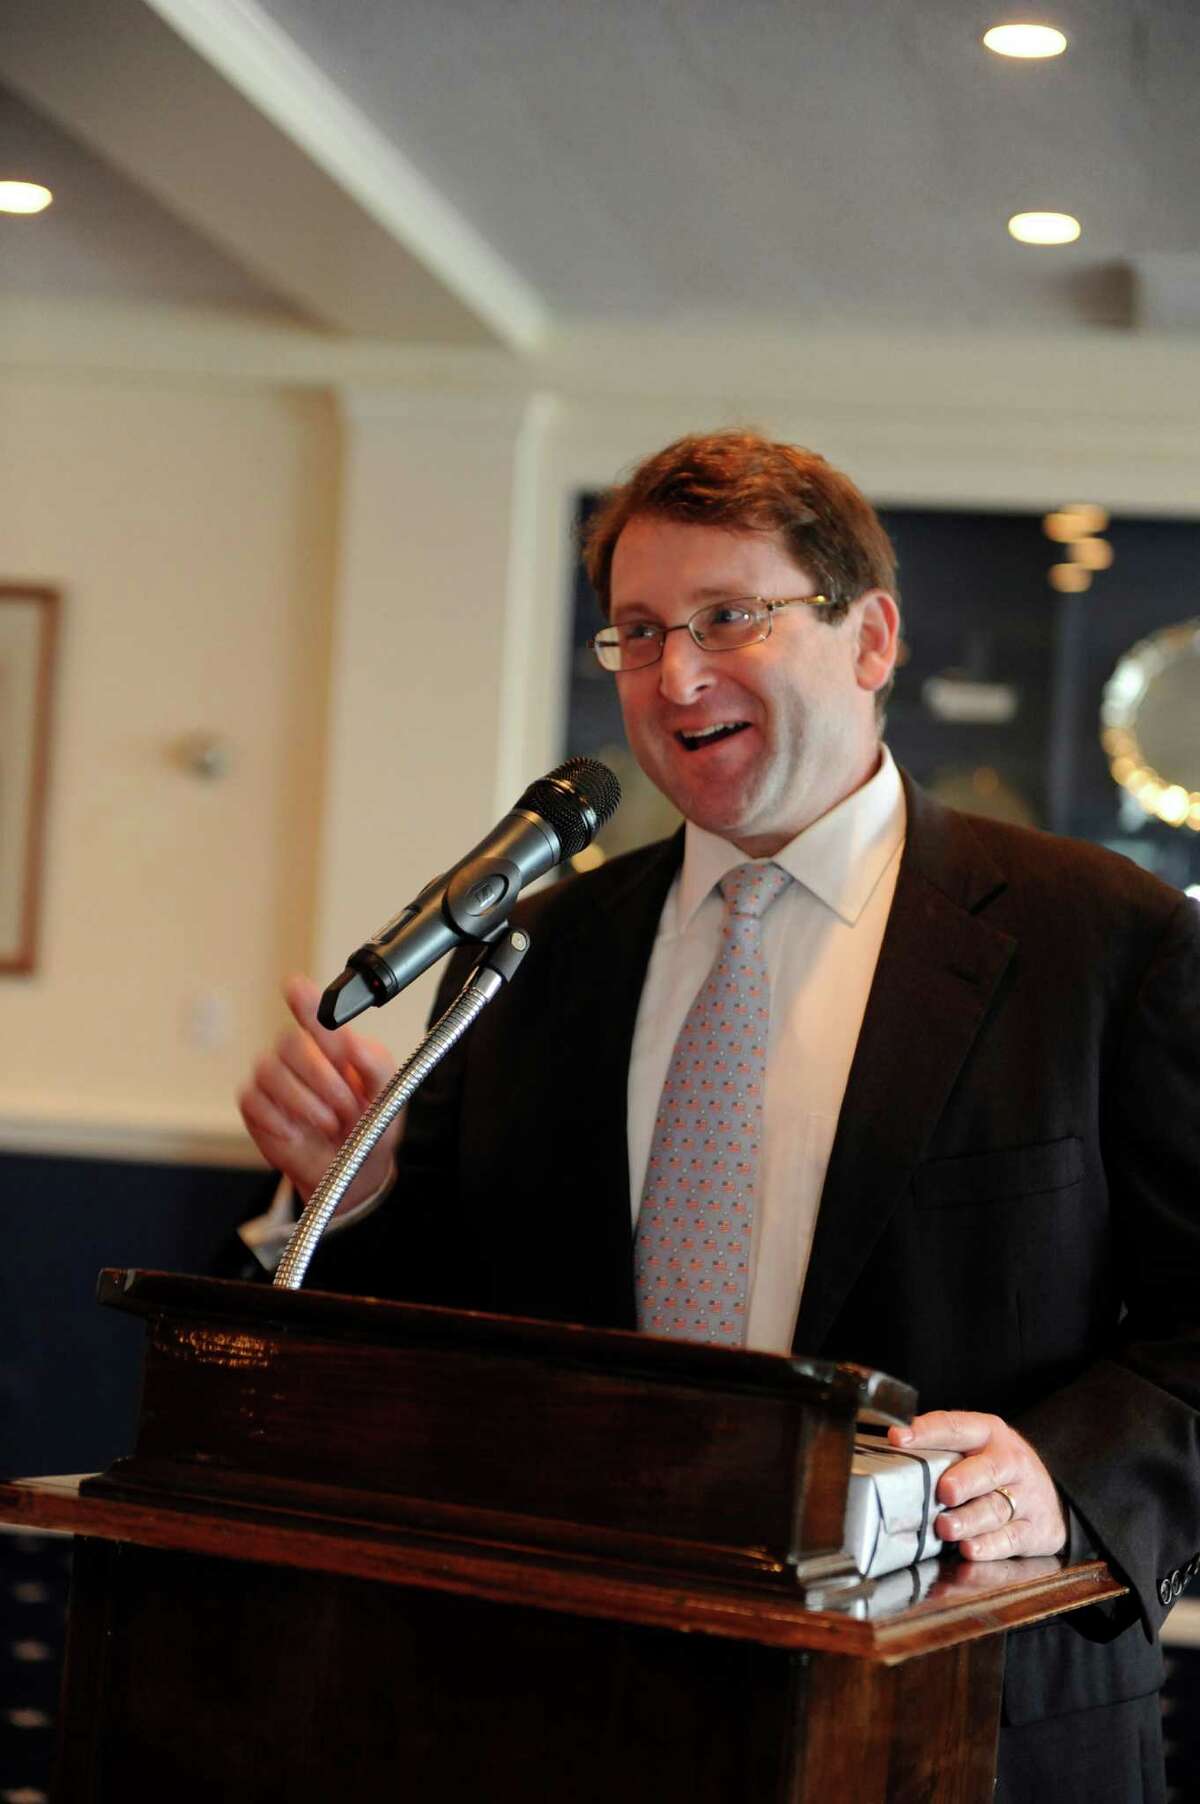 Greenwich attorney Richard DiPreta received the Robert G. Krause Probate Pro Bono Award, in recognition of the pro bono work he has performed on behalf of town residents, during the Greenwich Bar Association's annual Law Day luncheon at the Indian Harbor Yacht Club Tuesday, May 15, 2012.